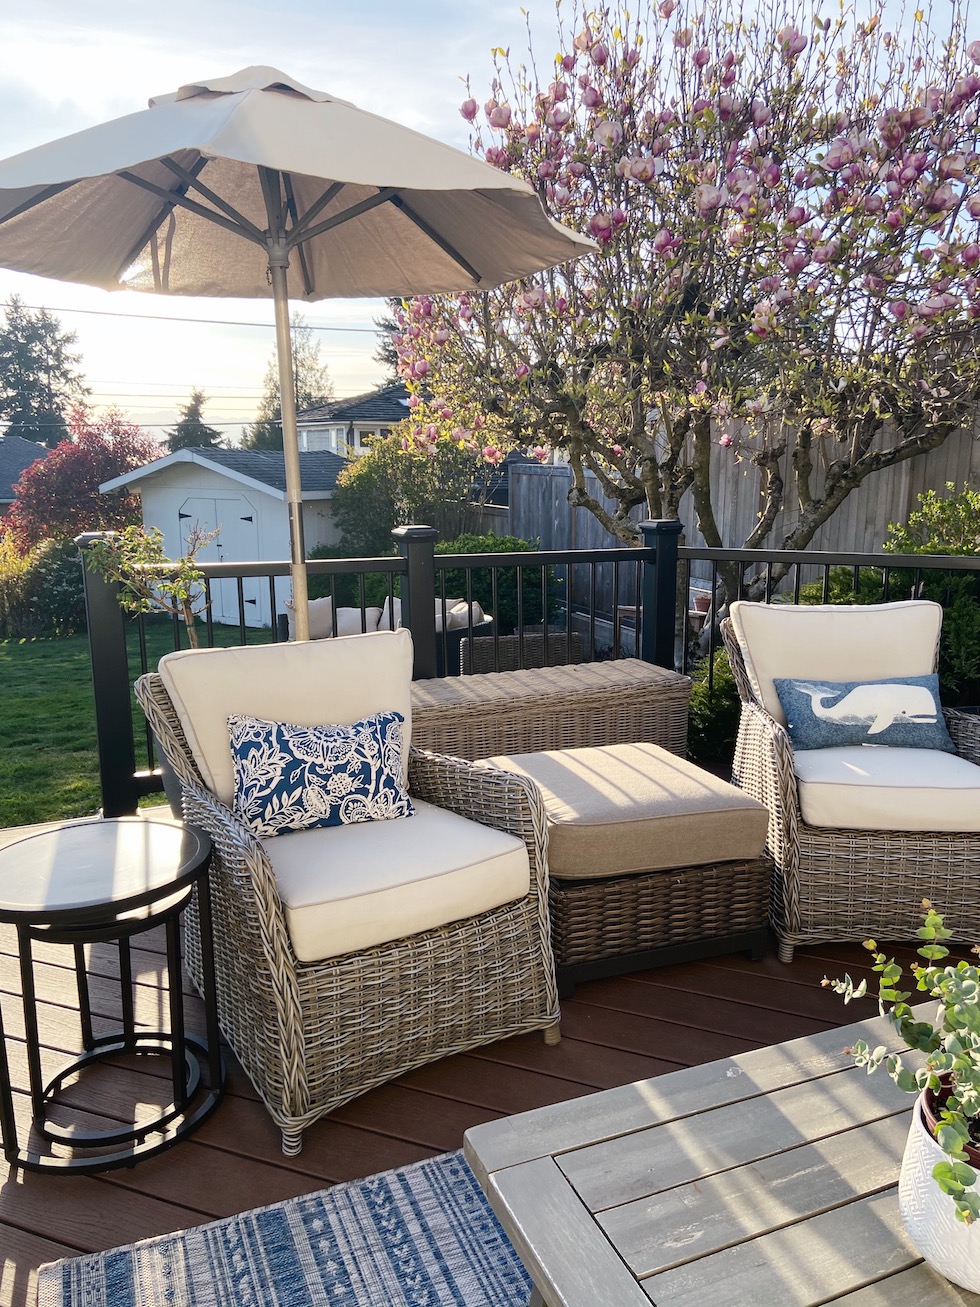 My Outdoor Furniture, Patio Umbrellas, Rugs and More